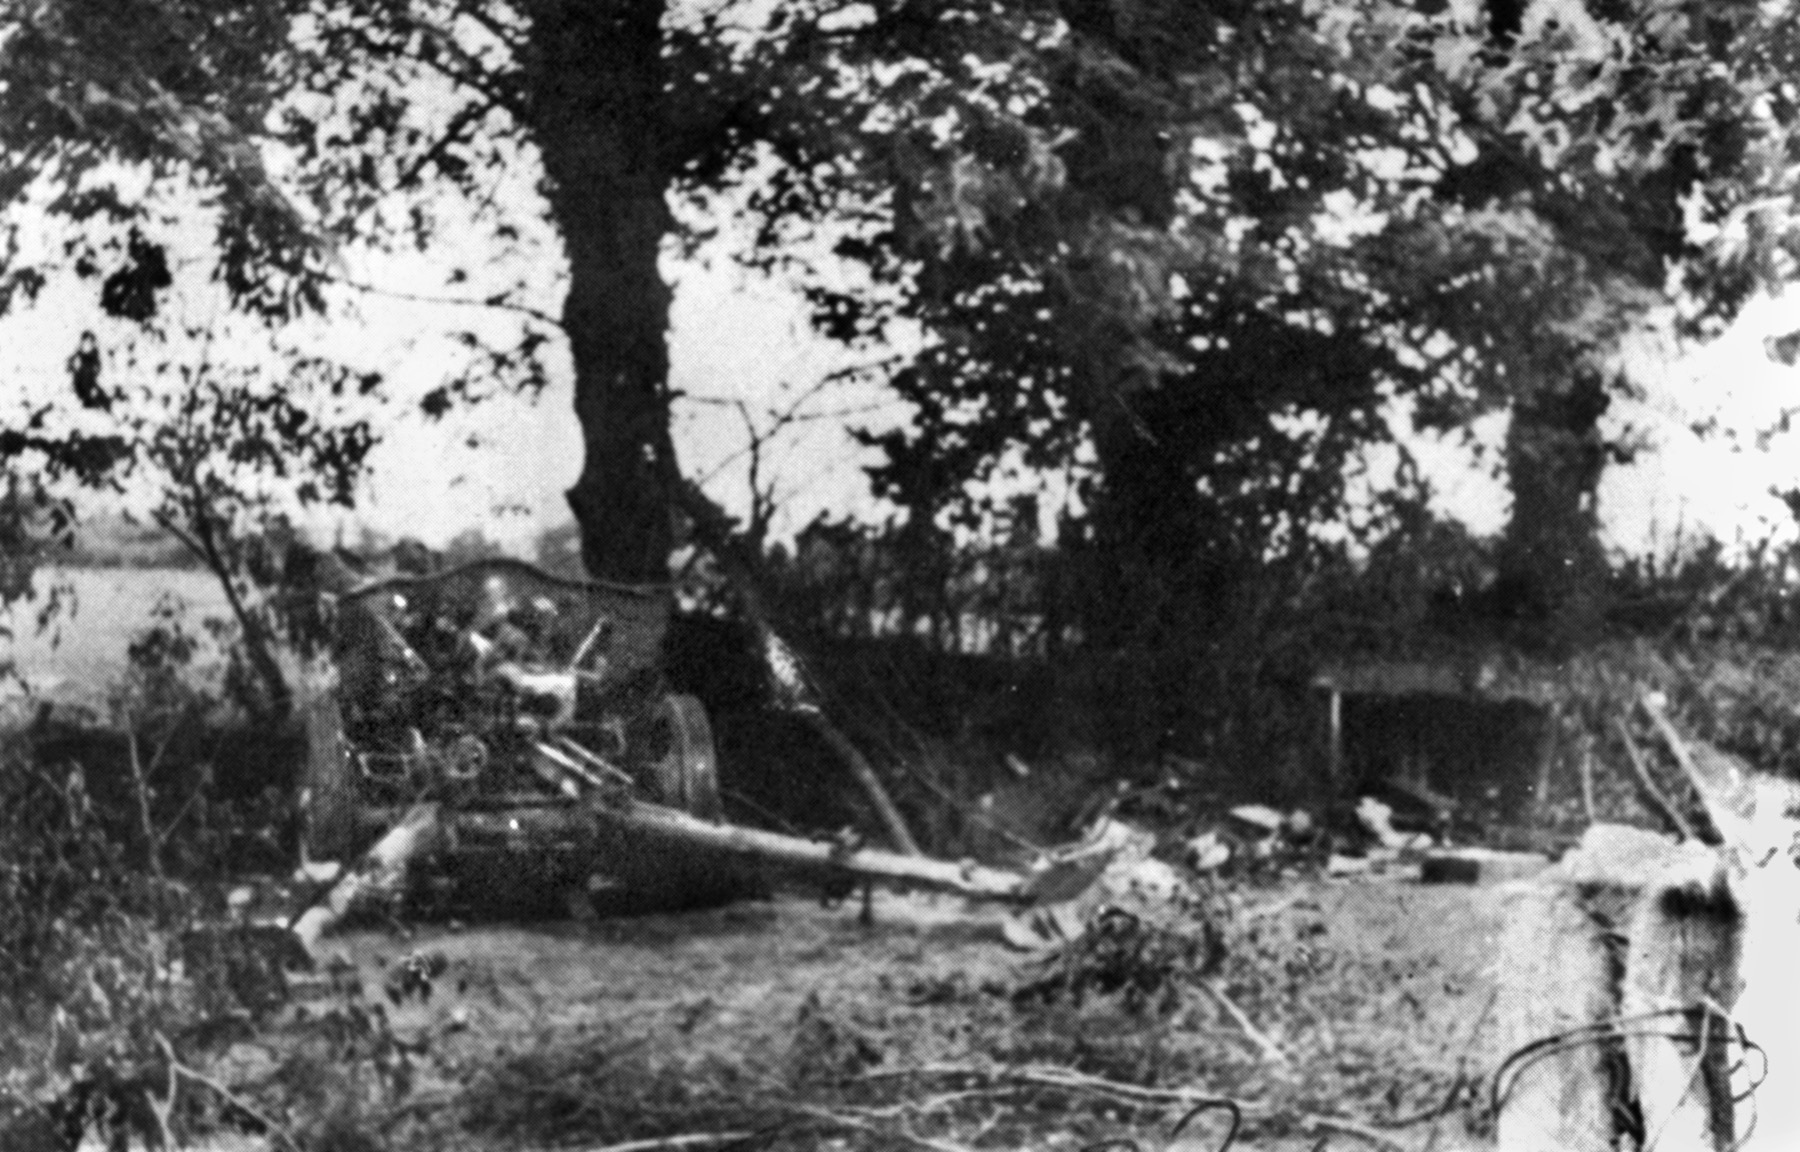 One of the German artillery guns knocked out by Easy Company. Malarkey almost lost his life there trying to retrieve a German Luger pistol. 